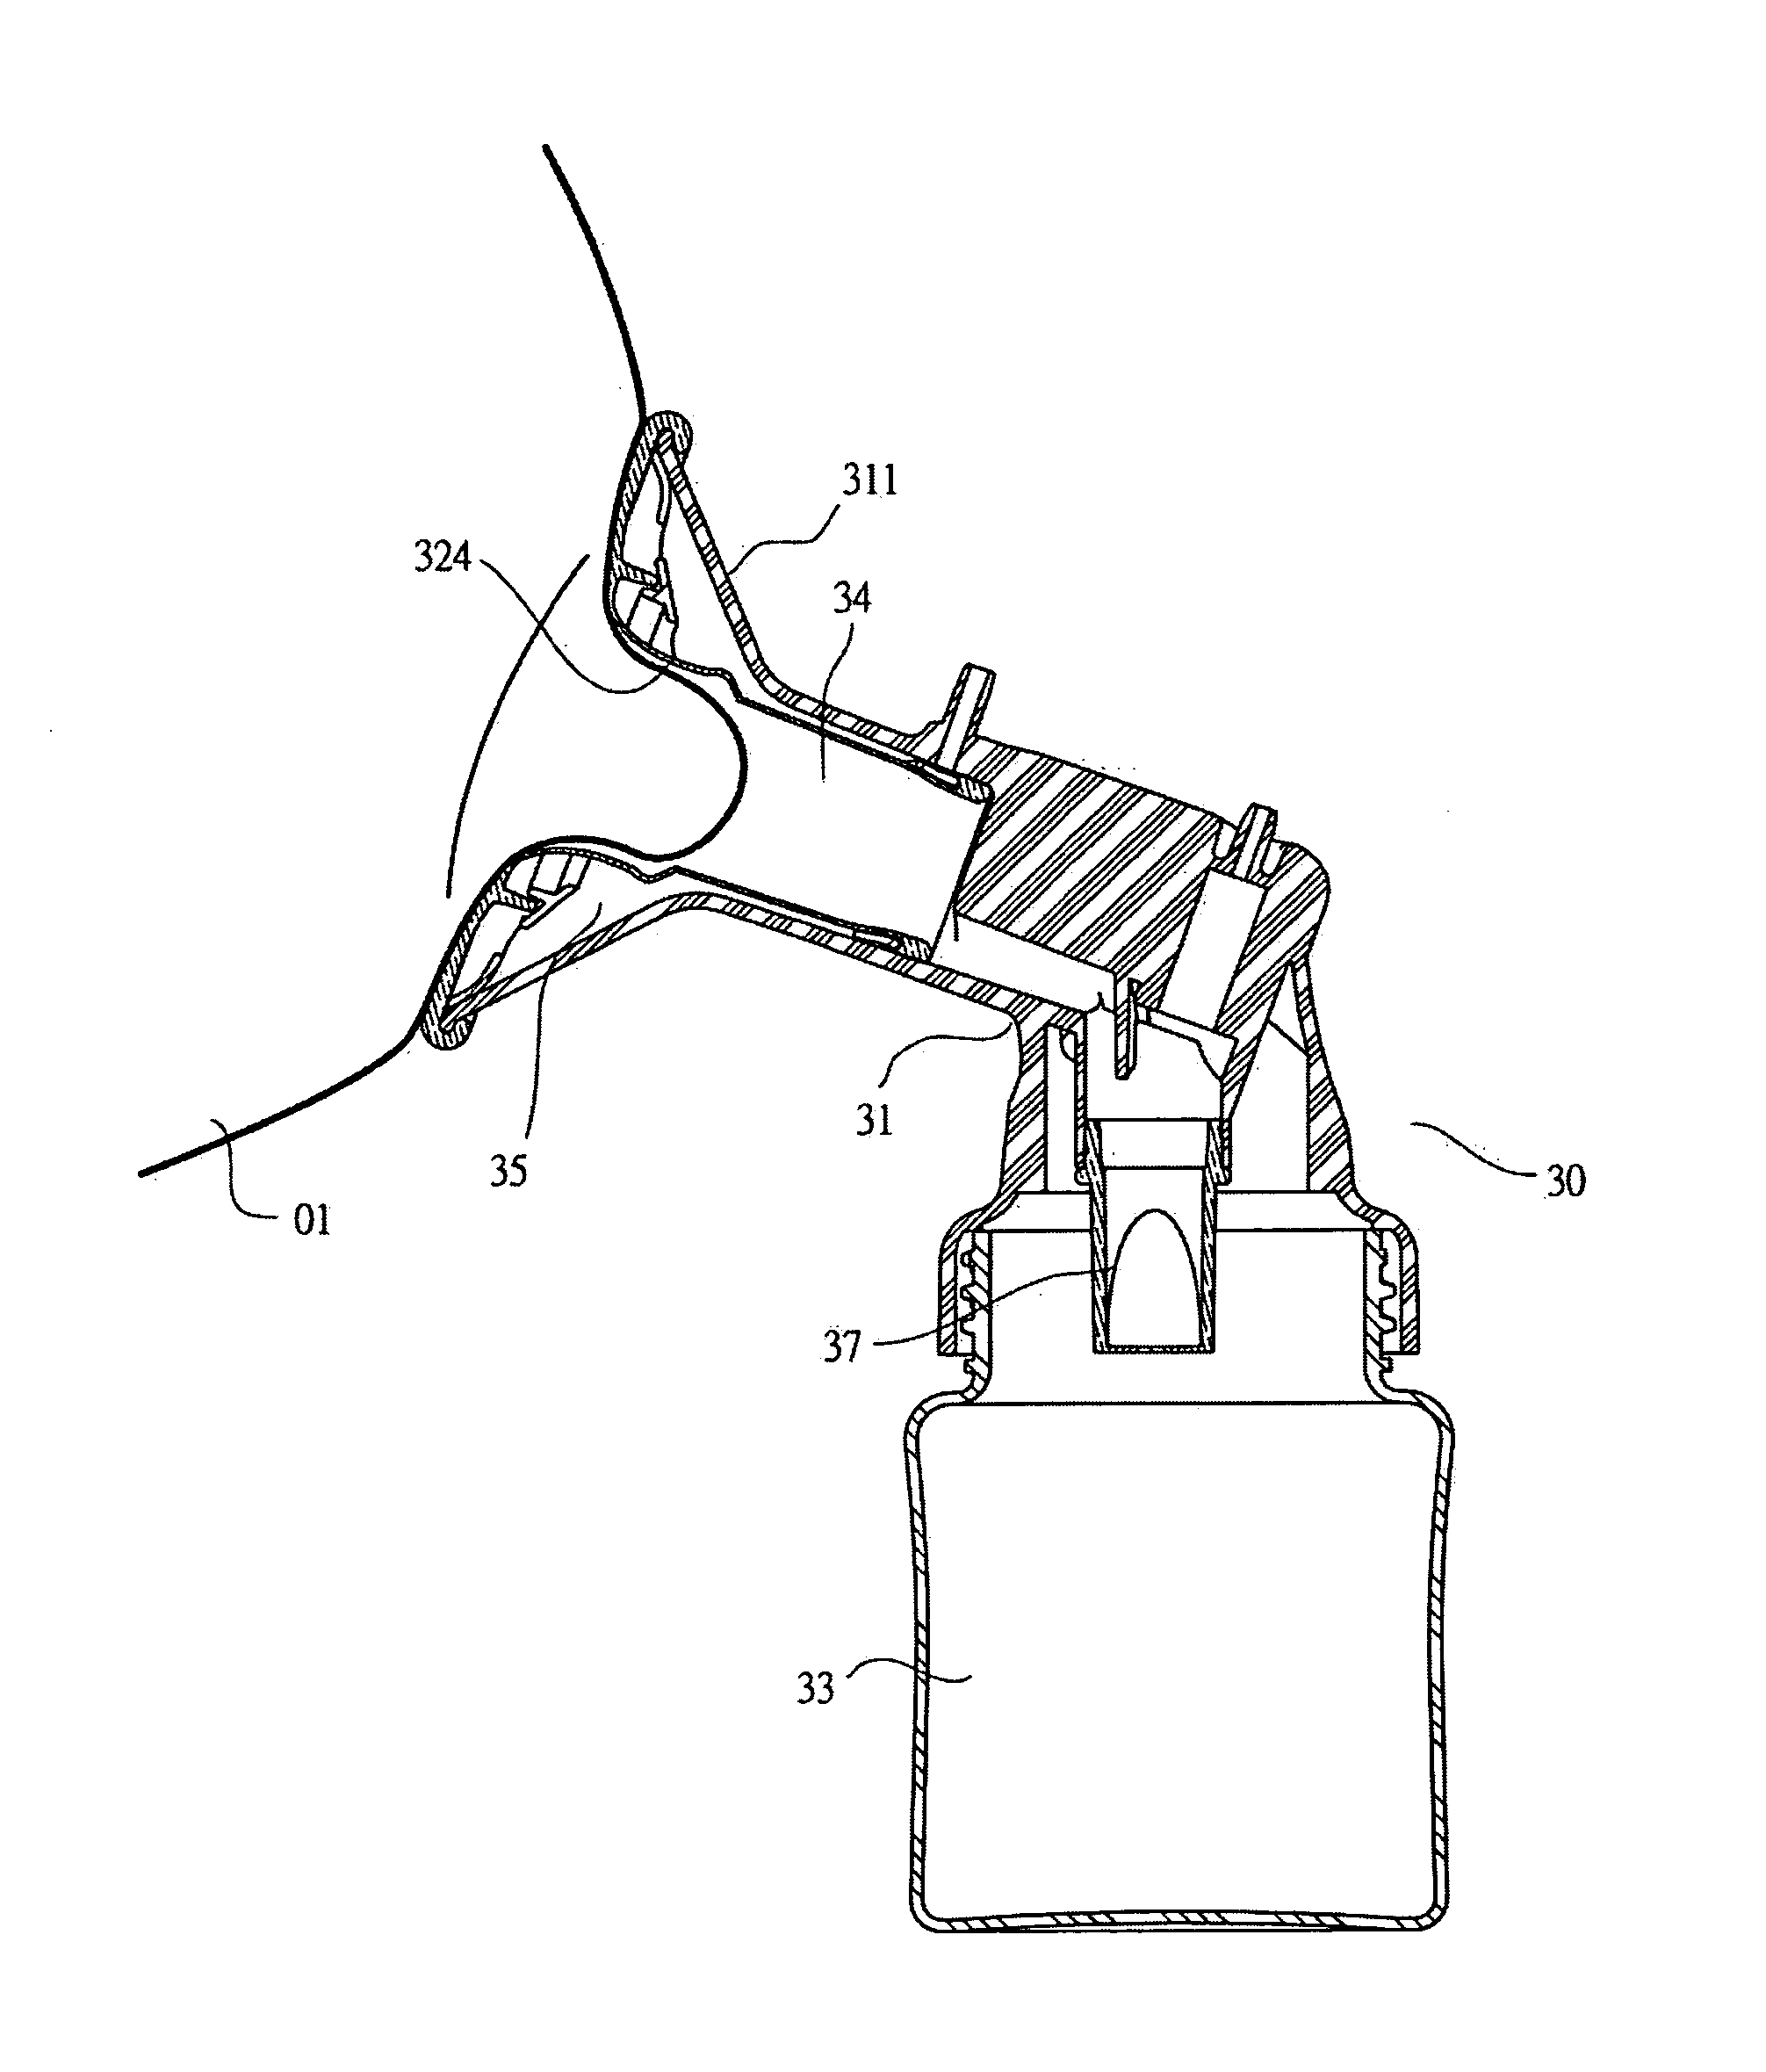 Milk expressing device capable of simulating a baby's suckling